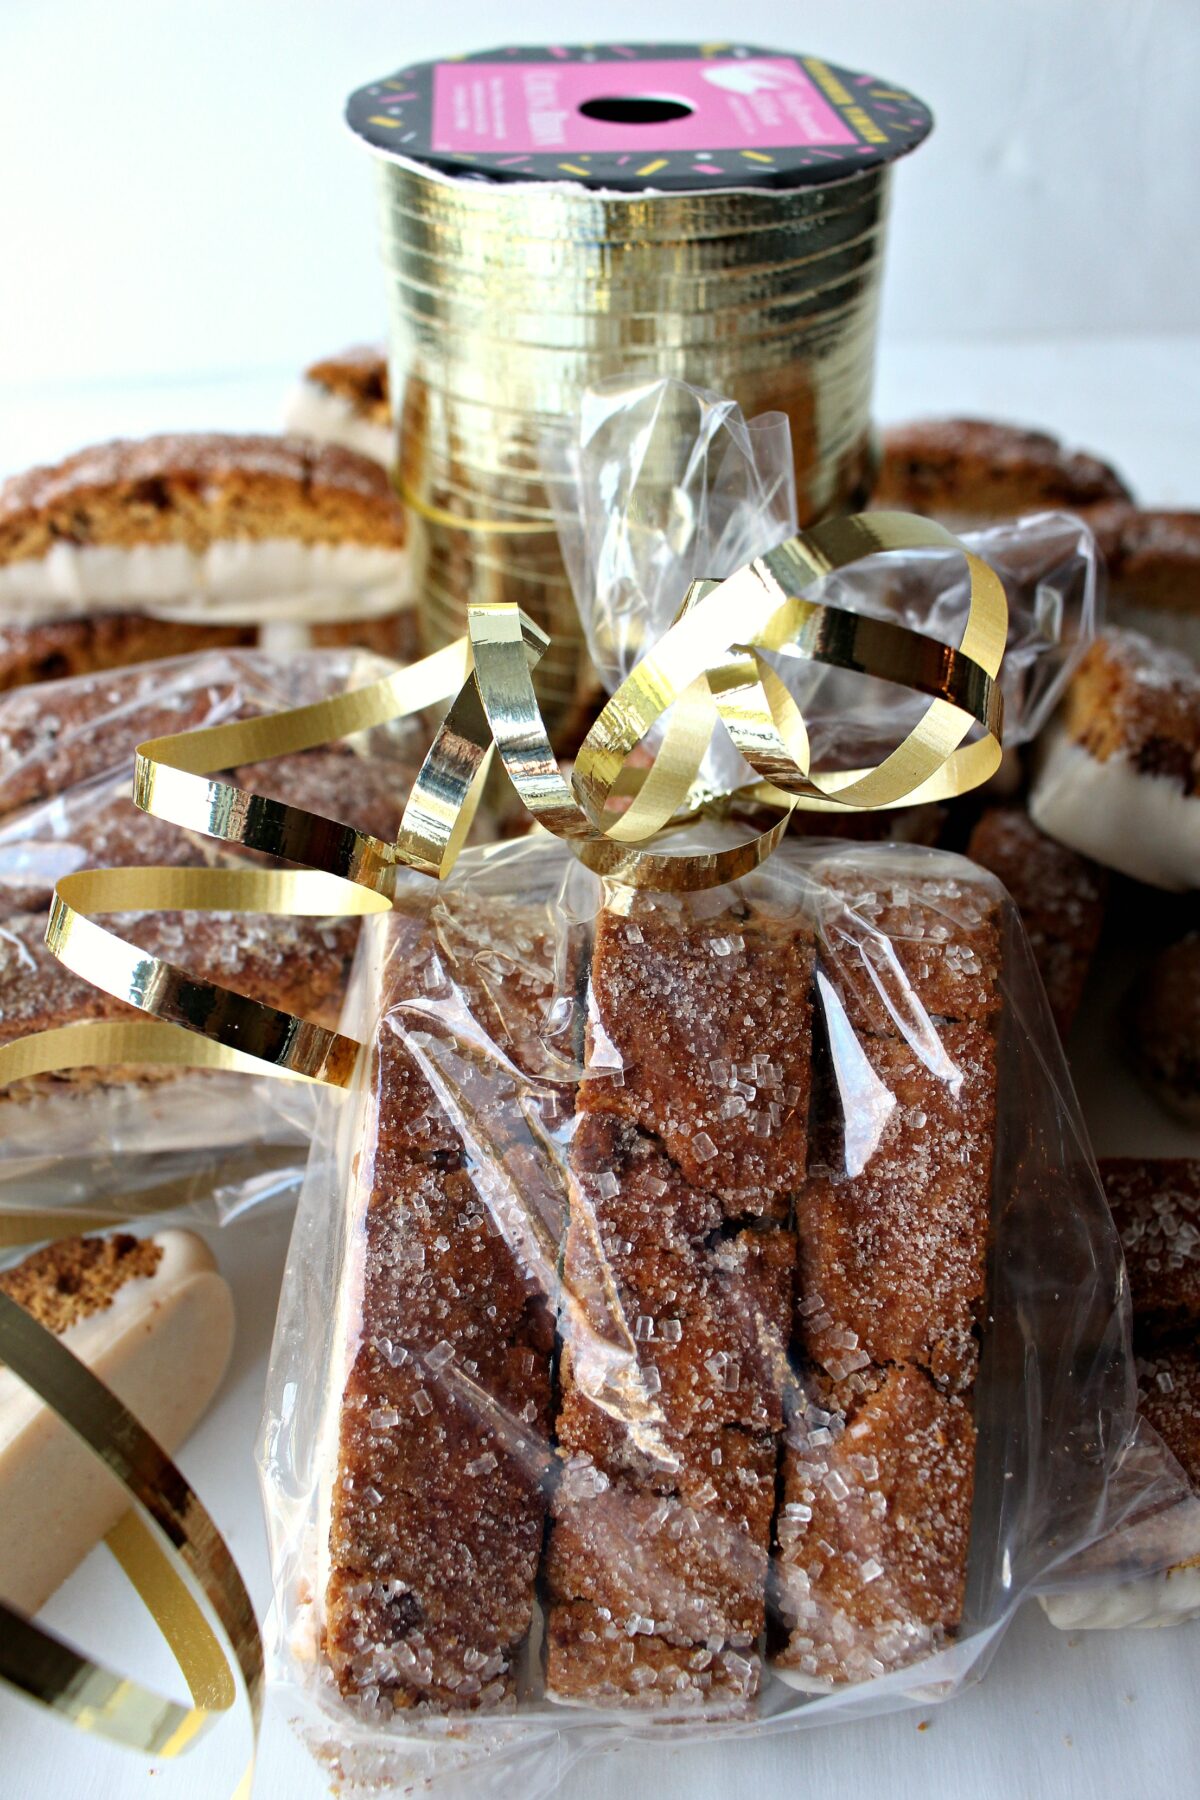 Biscotti wrapped for gifting in cellophane bags tied with gold ribbon.